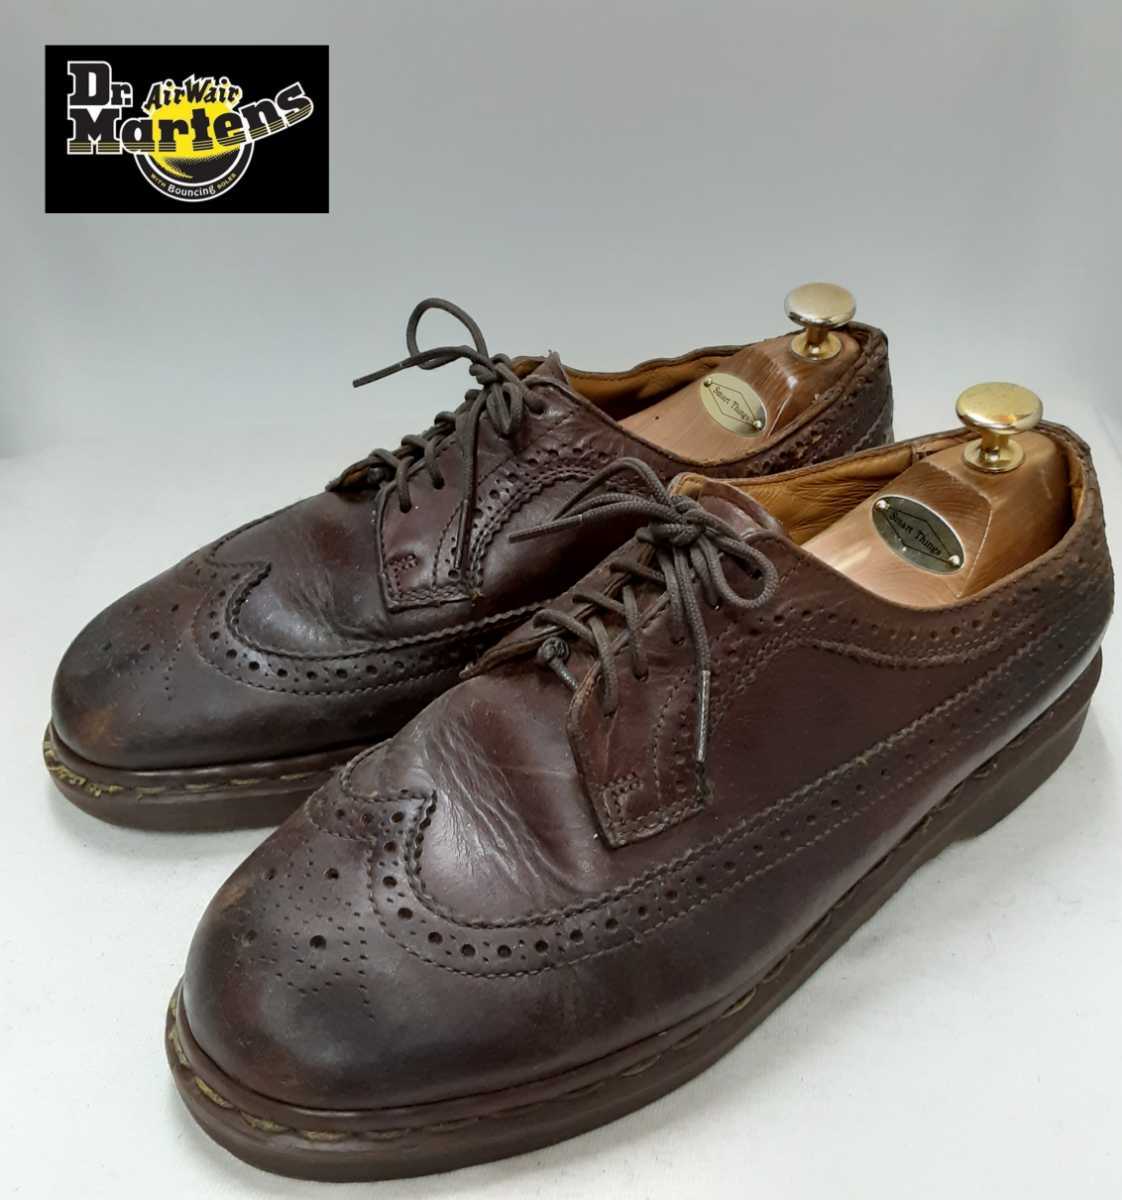  most price!1 point thing! England made! Dr. Martens DR.MARTINS original leather Wing chip shoes leather shoes Brown / tea color size inscription 9 27.5cm corresponding 